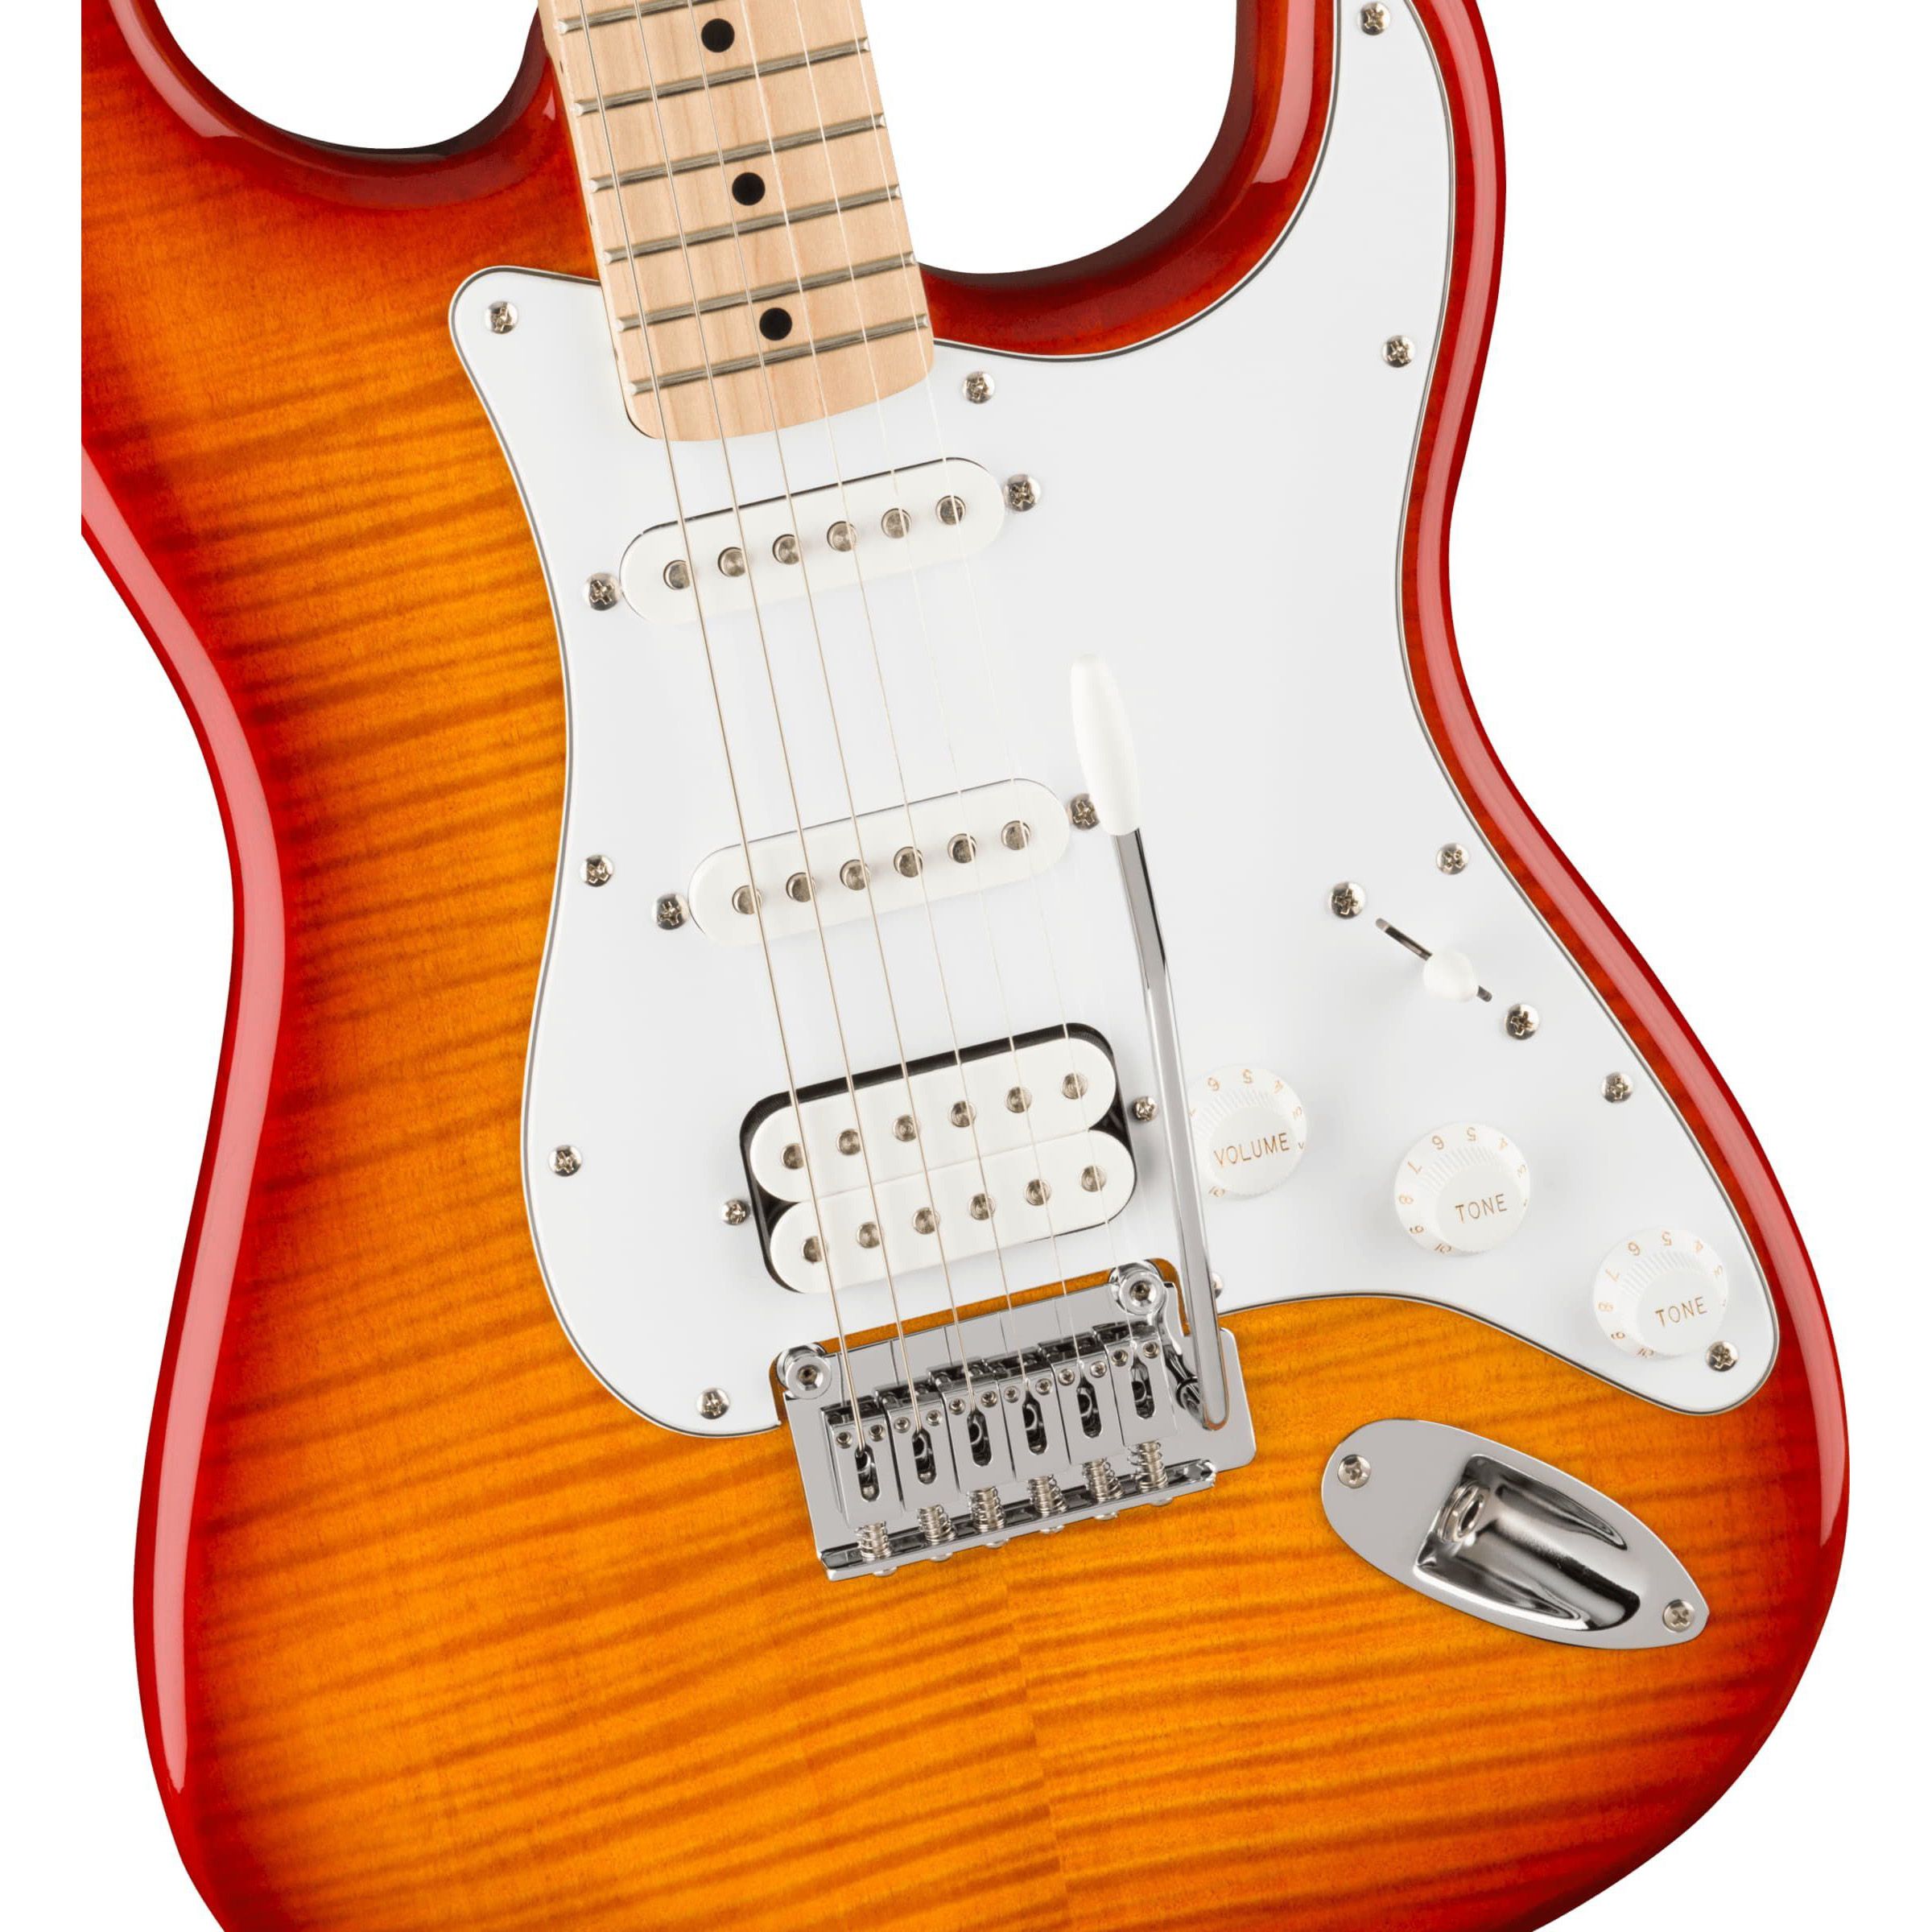 Squier stratocaster hss. Squier Affinity 2021. Электрогитара Squier Affinity Stratocaster. Squier Strat Affinity. Электрогитара Fender Squier Affinity.